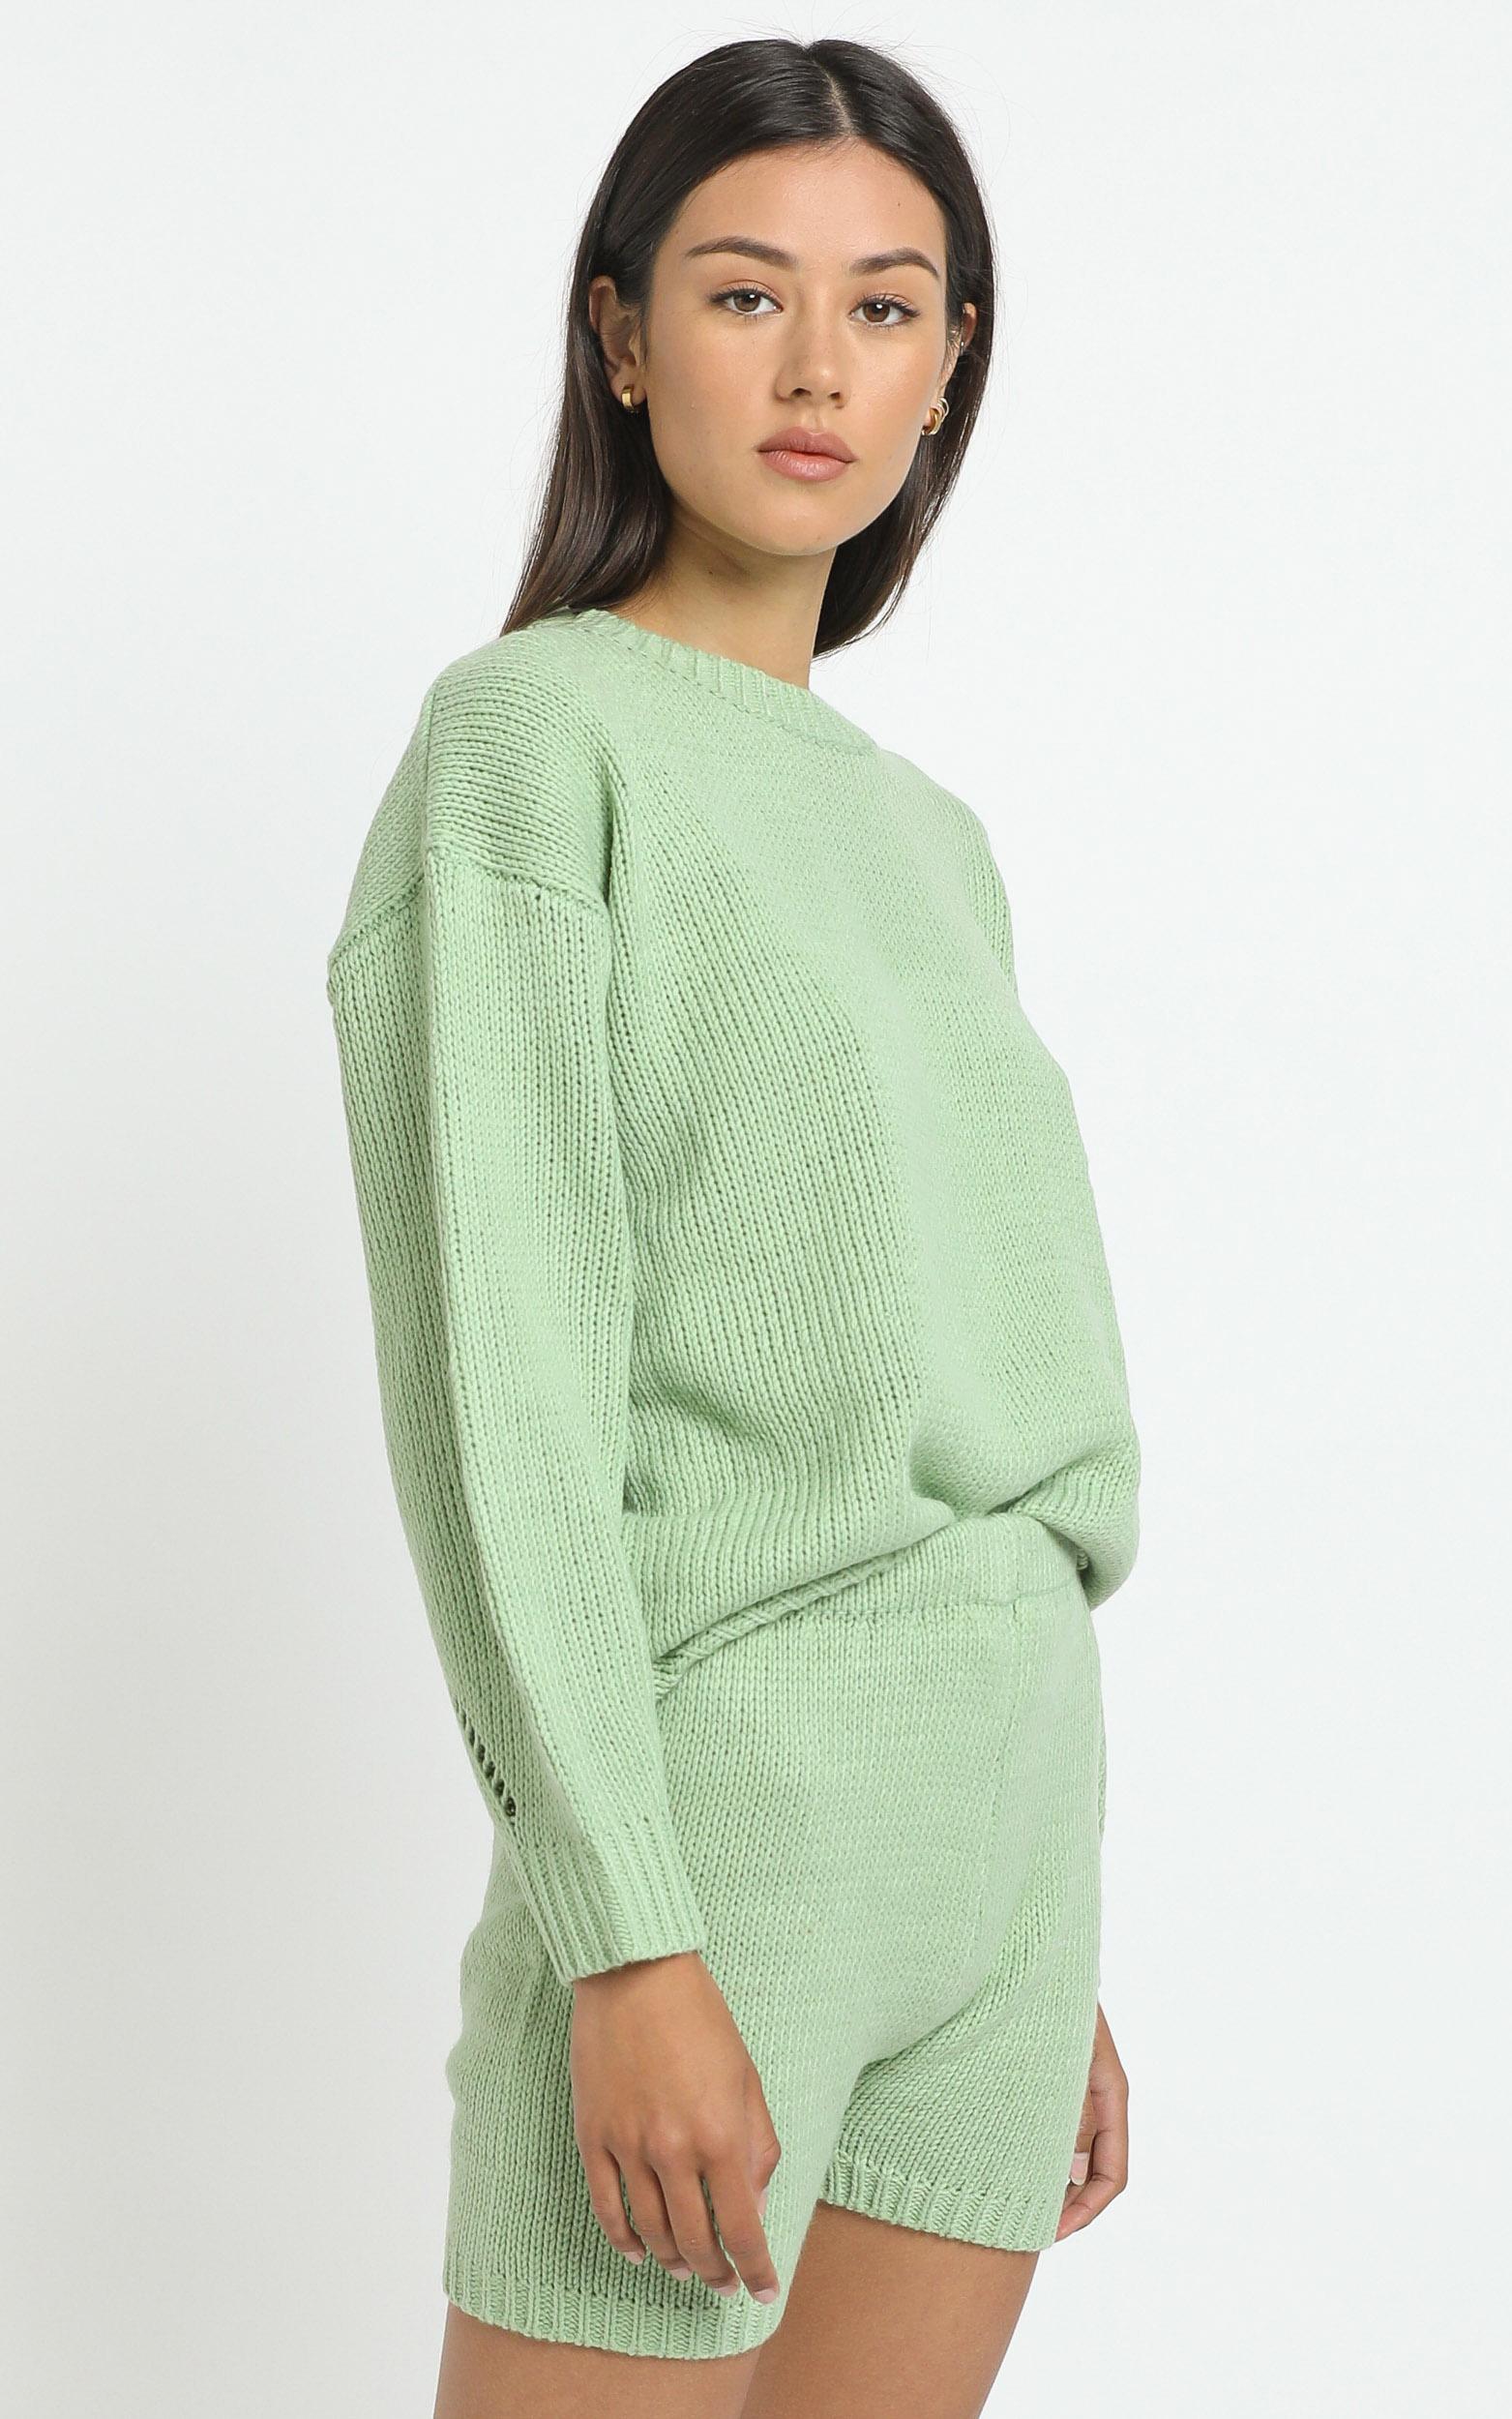 Becca Knit Shorts in Green - 12 (L), Green, hi-res image number null